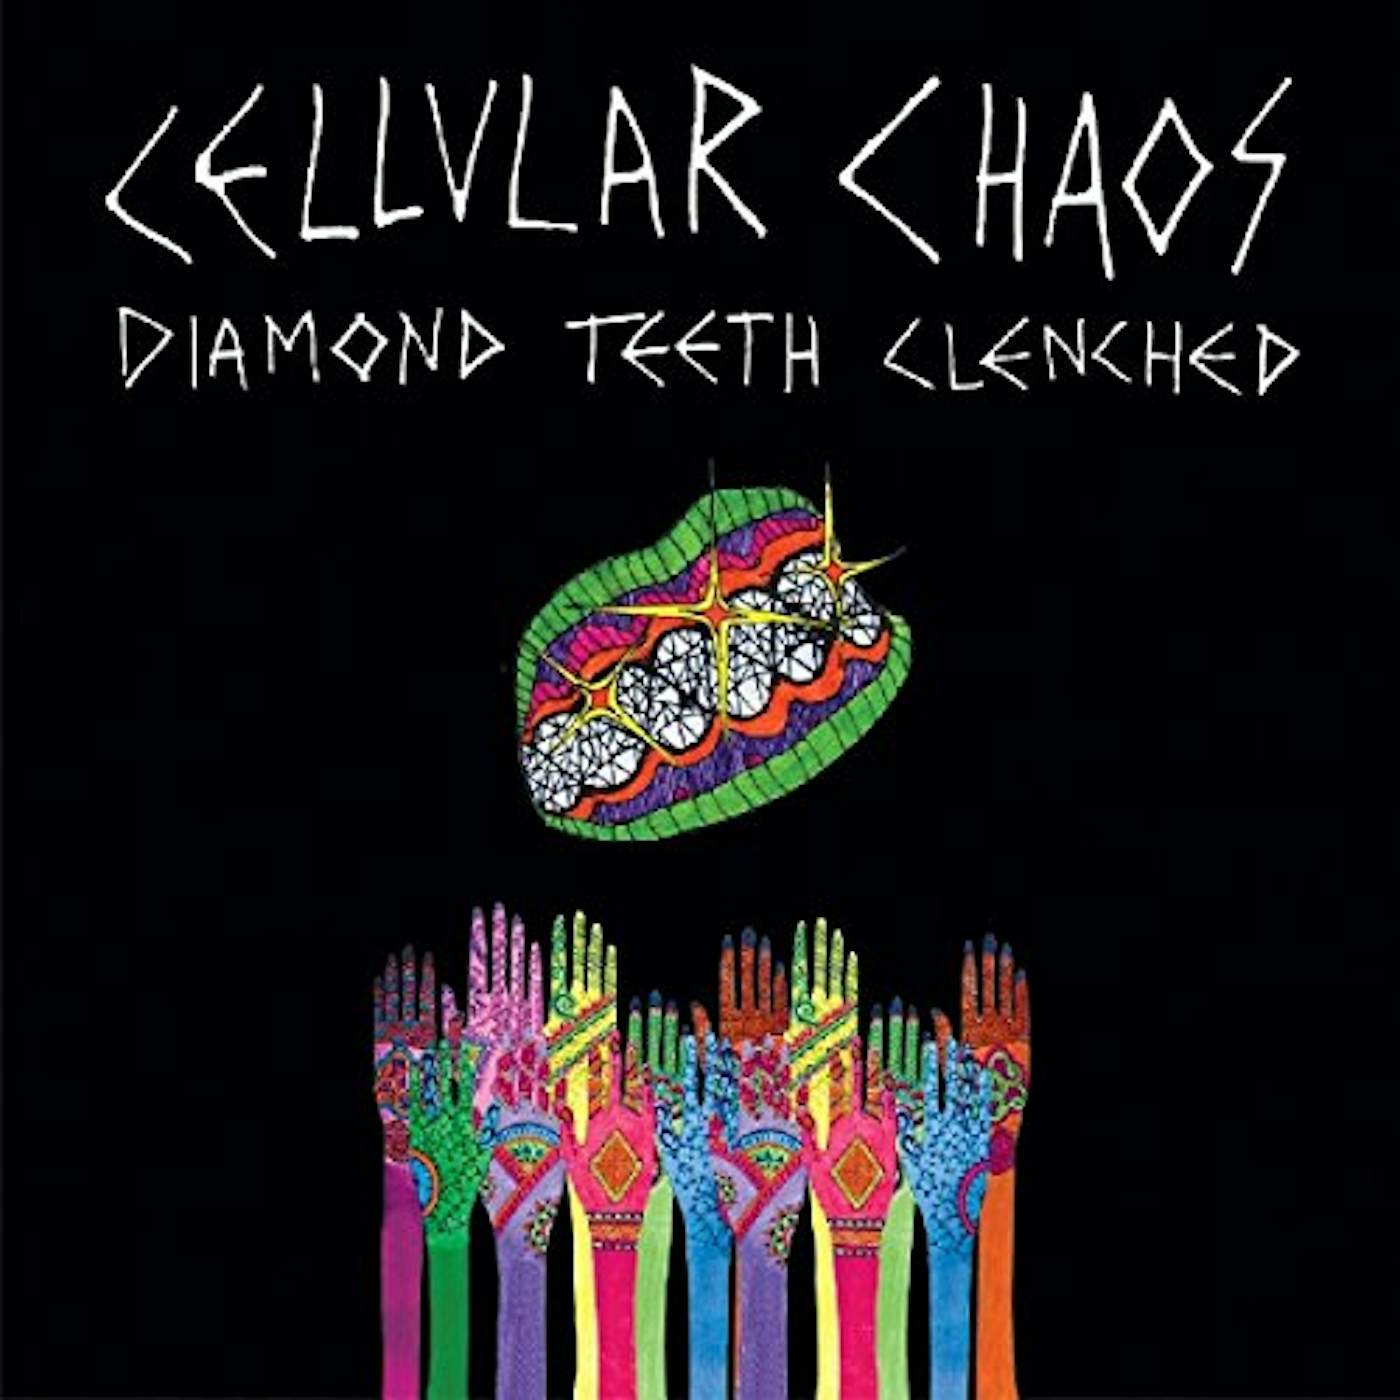 Cellular Chaos DIAMOND TEETH CLENCHED CD